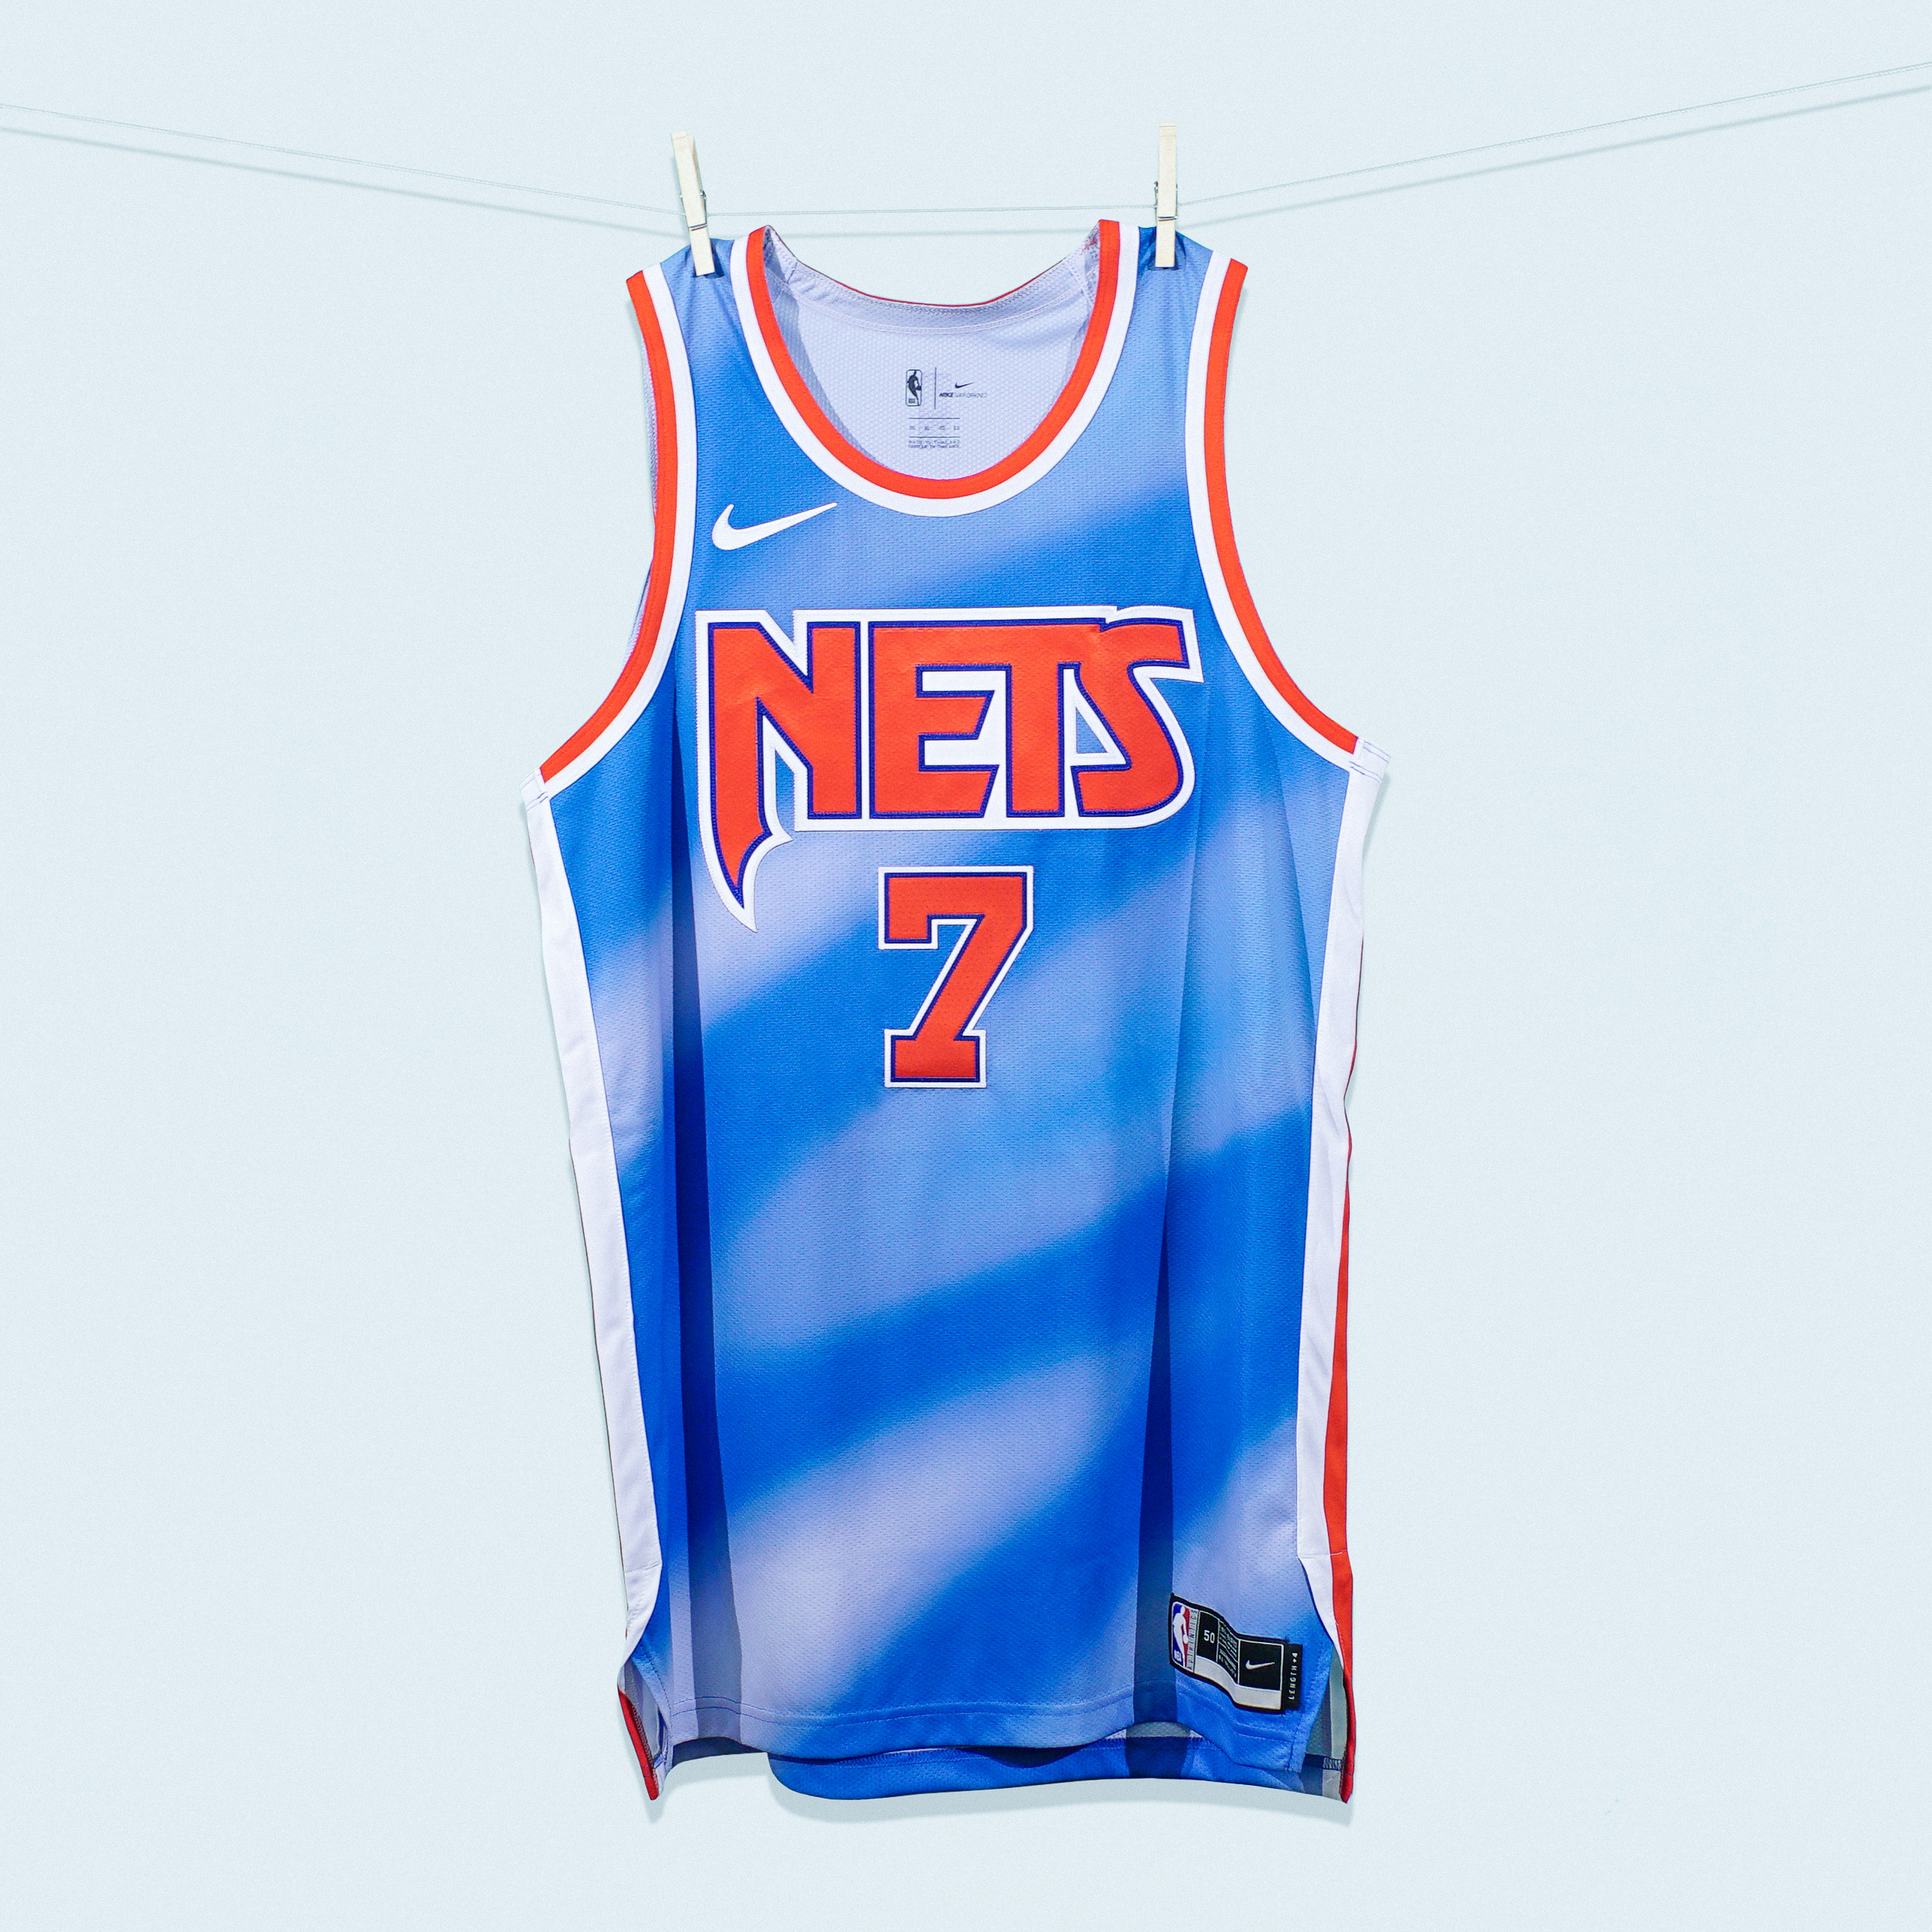 30 years ago the New Jersey Nets found a new look. 